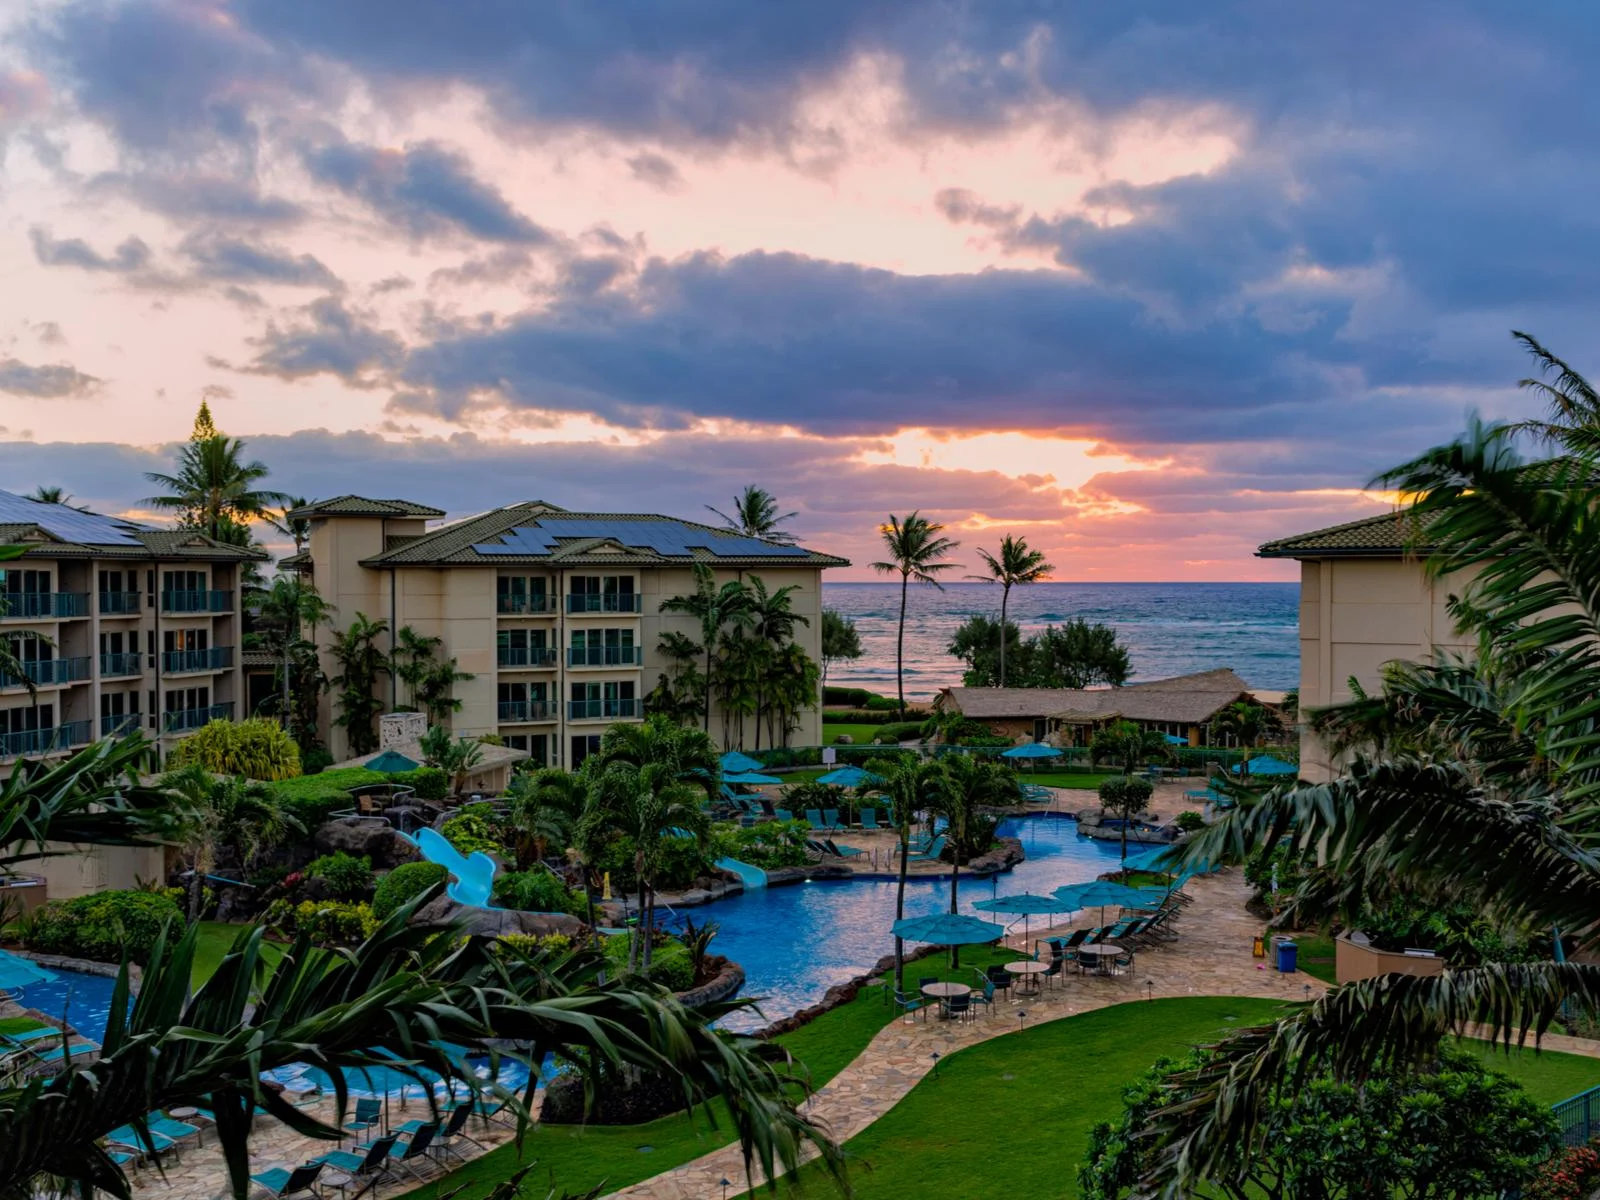 Young sunrise over the beachfront Waipouli Beach Resort, one of the best hotels in Kauai, in frame are its resort structures and blue irregularly shaped pool